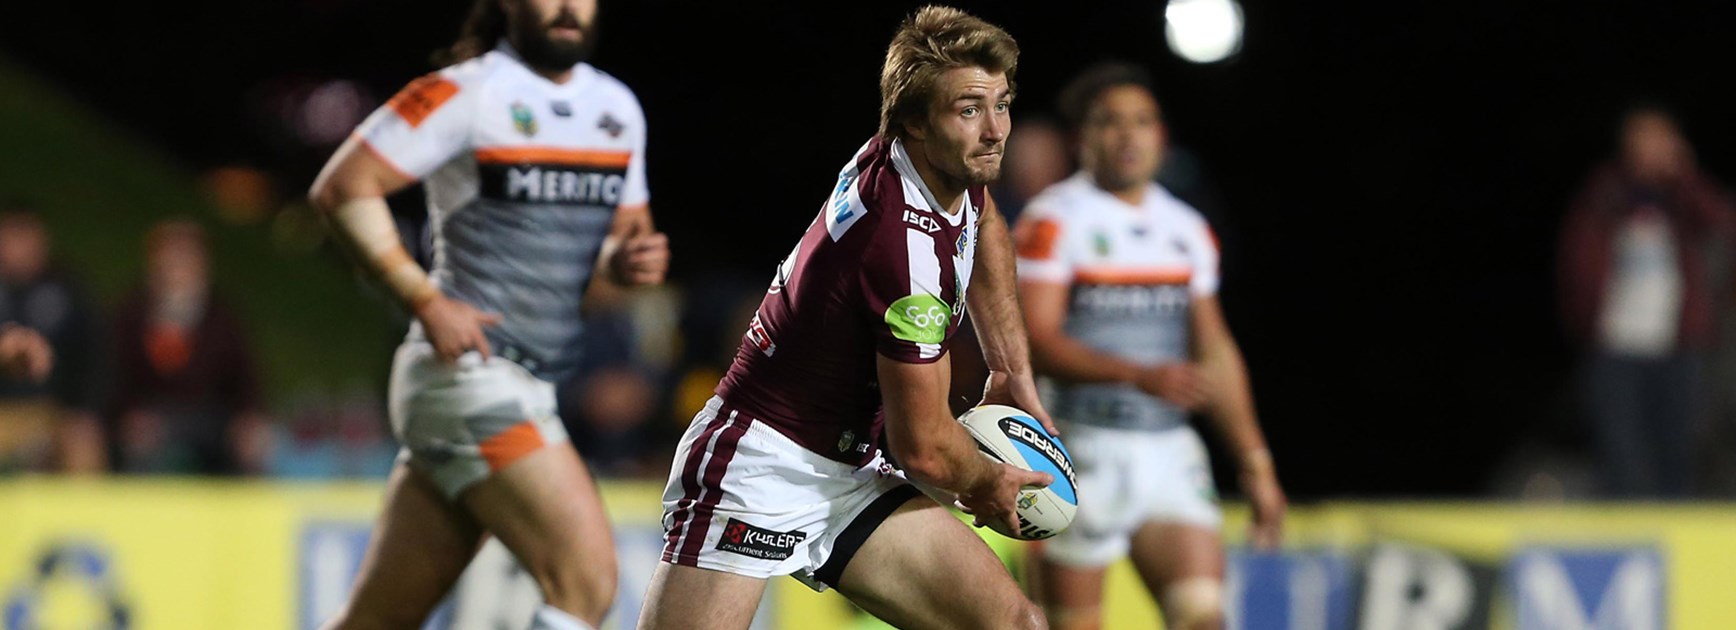 Sea Eagles five-eighth Kieran Foran was heavily involved during his side's Round 15 meeting with Wests Tigers.